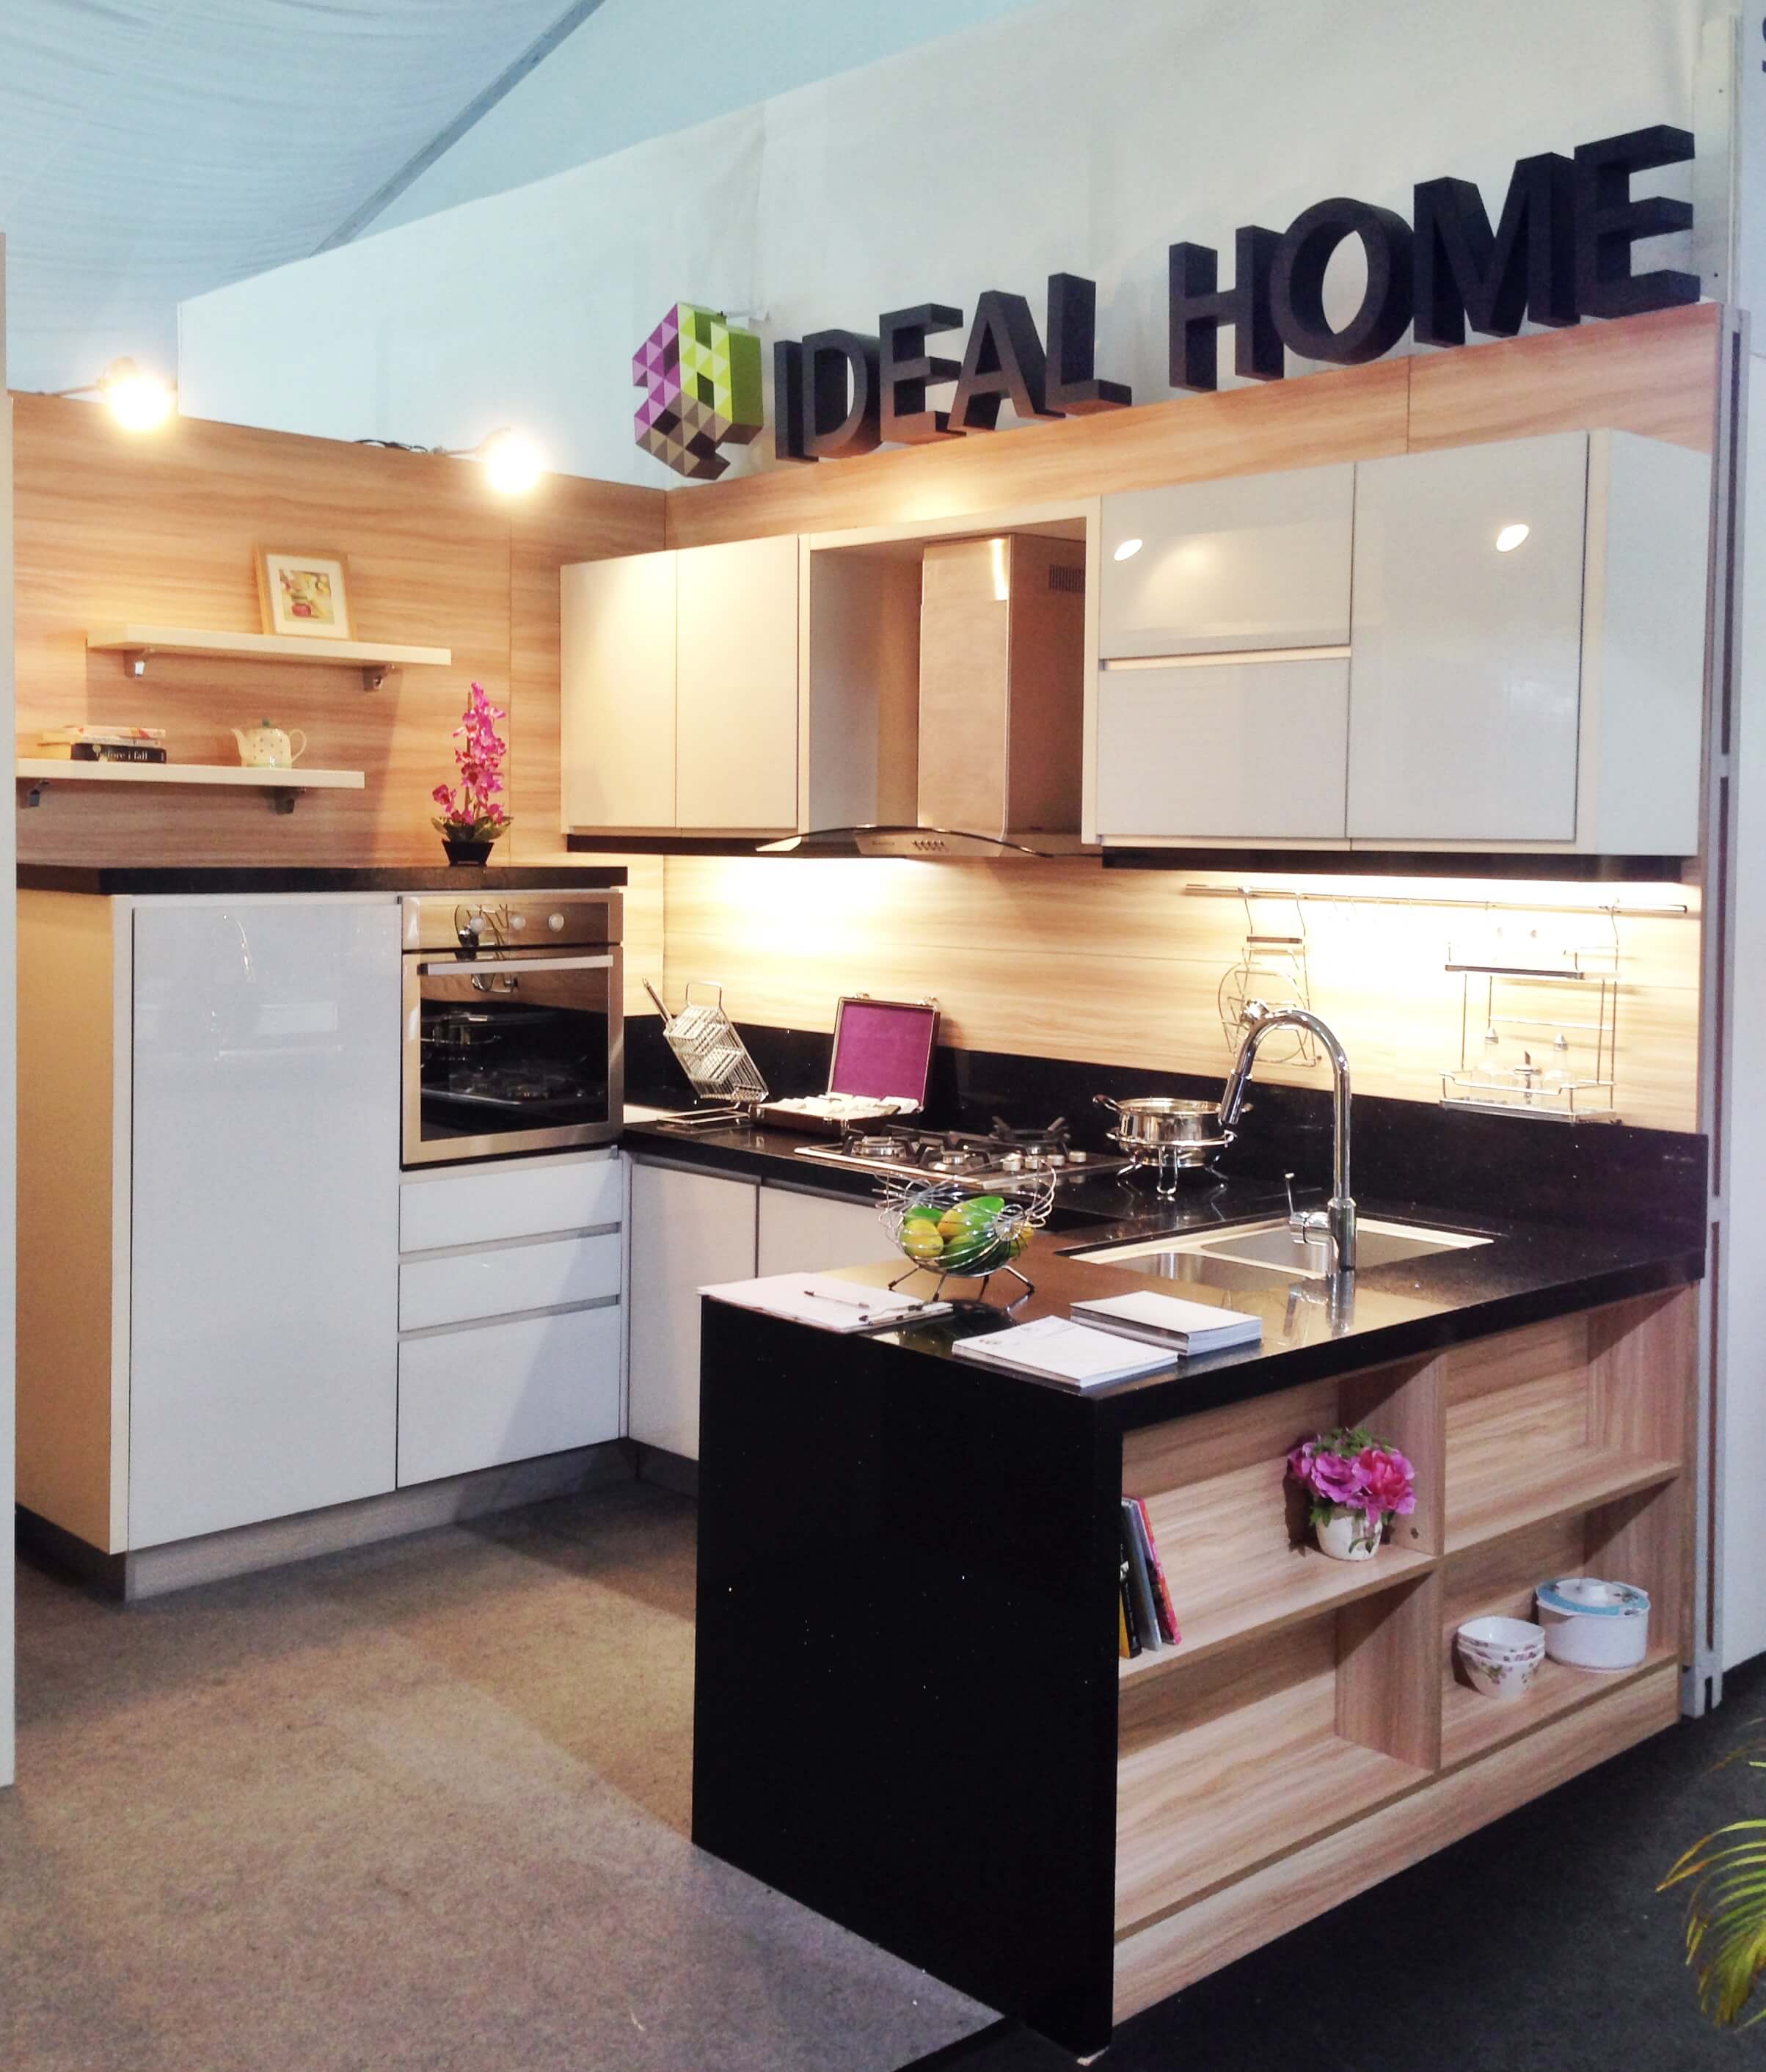 Ideal Home Modular Cabinets Exhibit at Worldbex (2014)